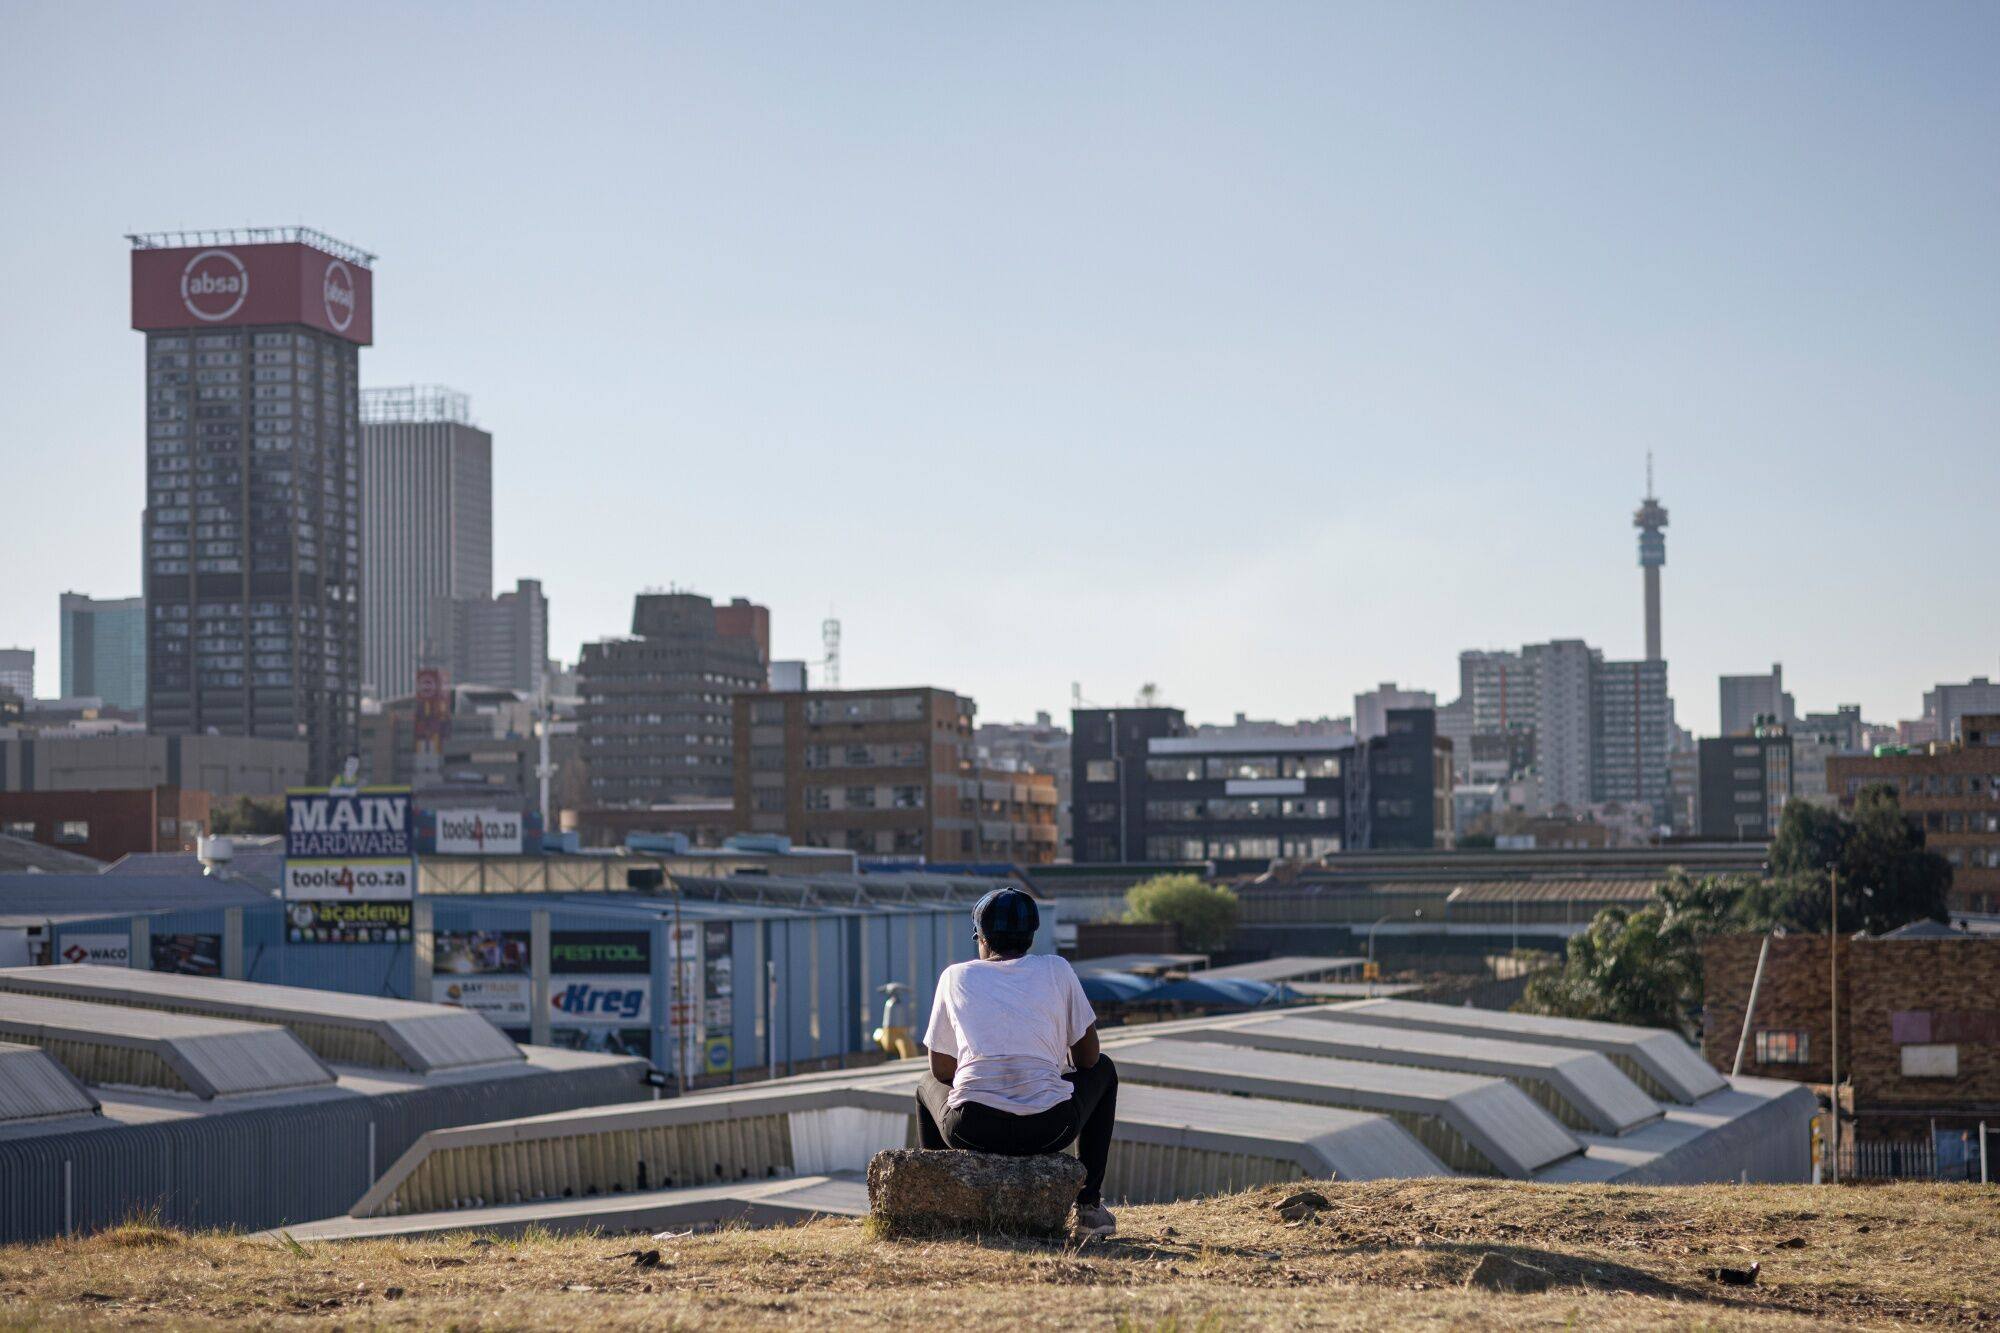 A resident looks out towards the skyline of the central business district in Johannesburg, South Africa, on August 15. The Brics summit will take place in the city from August 22-24, with plans to expand the bloc’s membership encountering resistance over concerns about diluting influence and complicating policymaking. Photo: Bloomberg